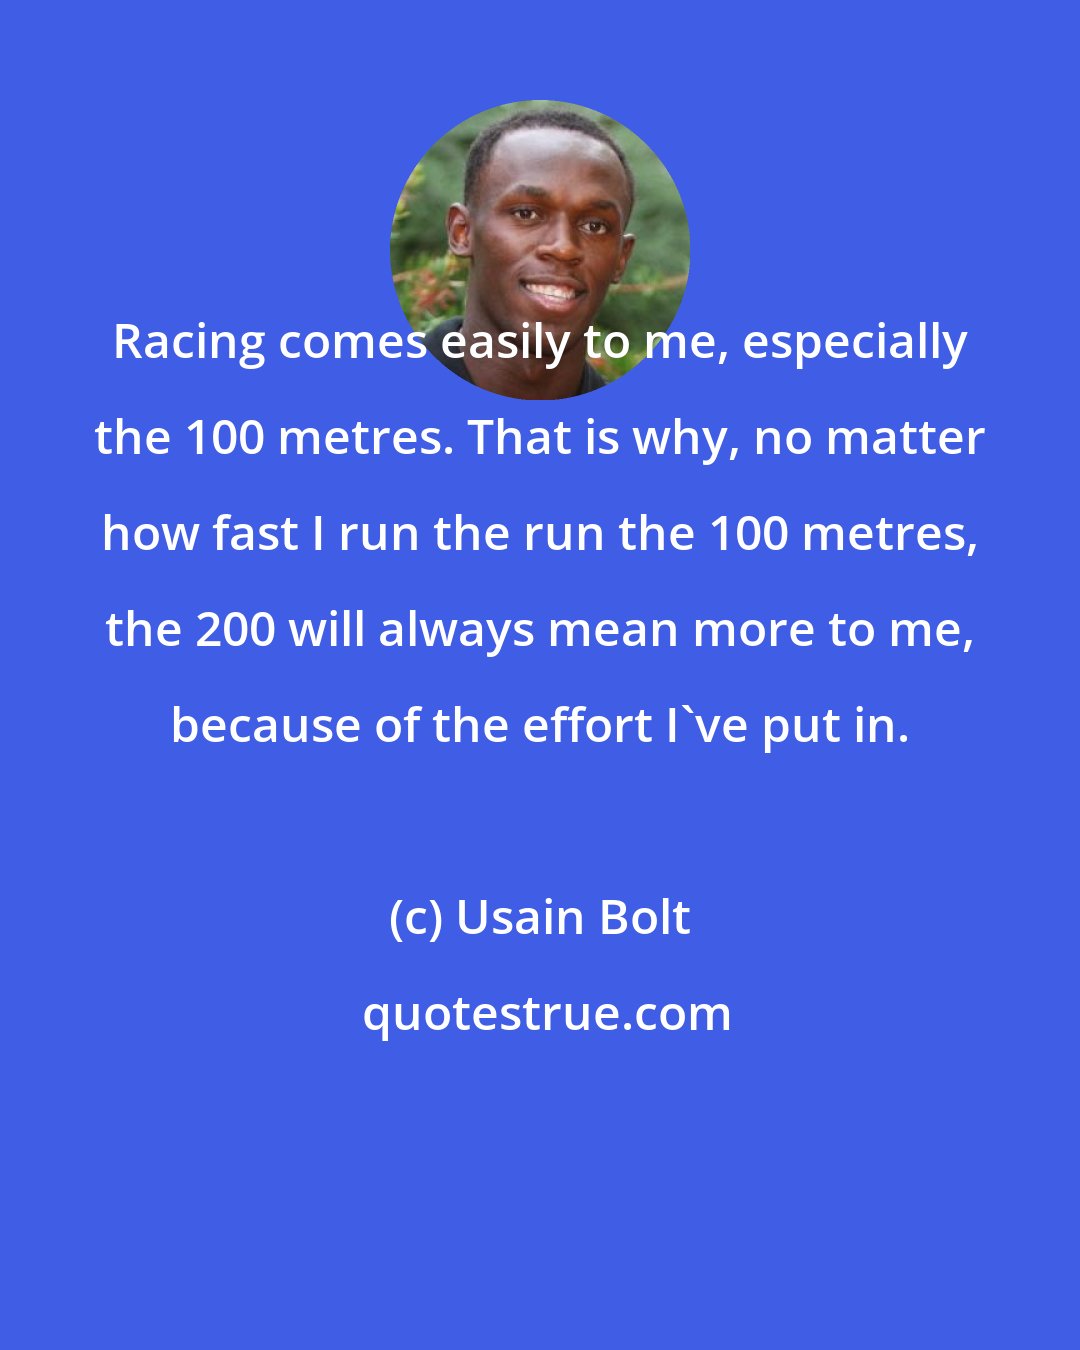 Usain Bolt: Racing comes easily to me, especially the 100 metres. That is why, no matter how fast I run the run the 100 metres, the 200 will always mean more to me, because of the effort I've put in.